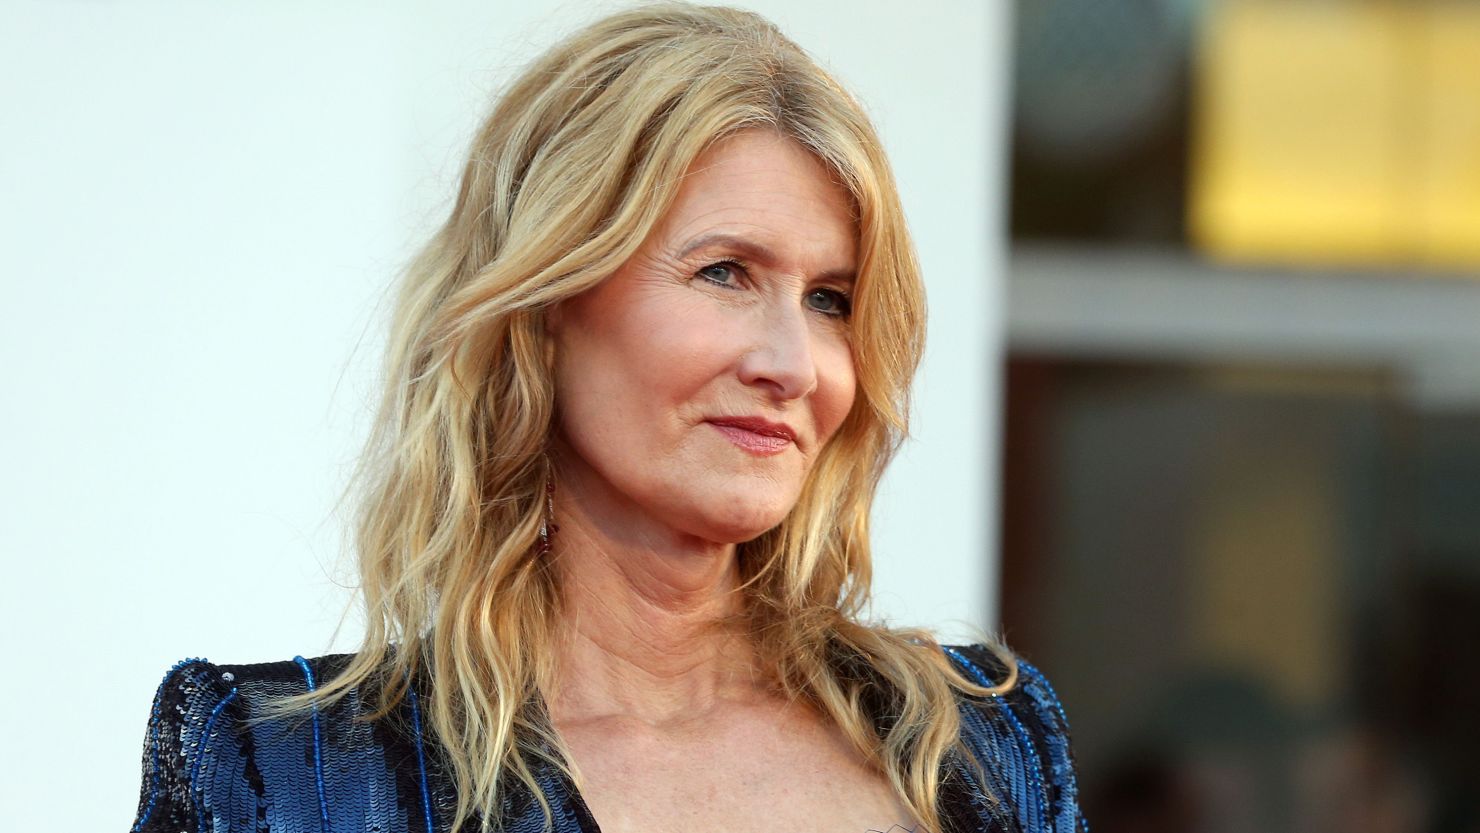 Laura Dern, seen here at "The Son" red carpet at the 79th Venice International Film Festival on September 07, 2022 in Venice, Italy, had a bit part in the season premiere of "The White Lotus" Season 2. 